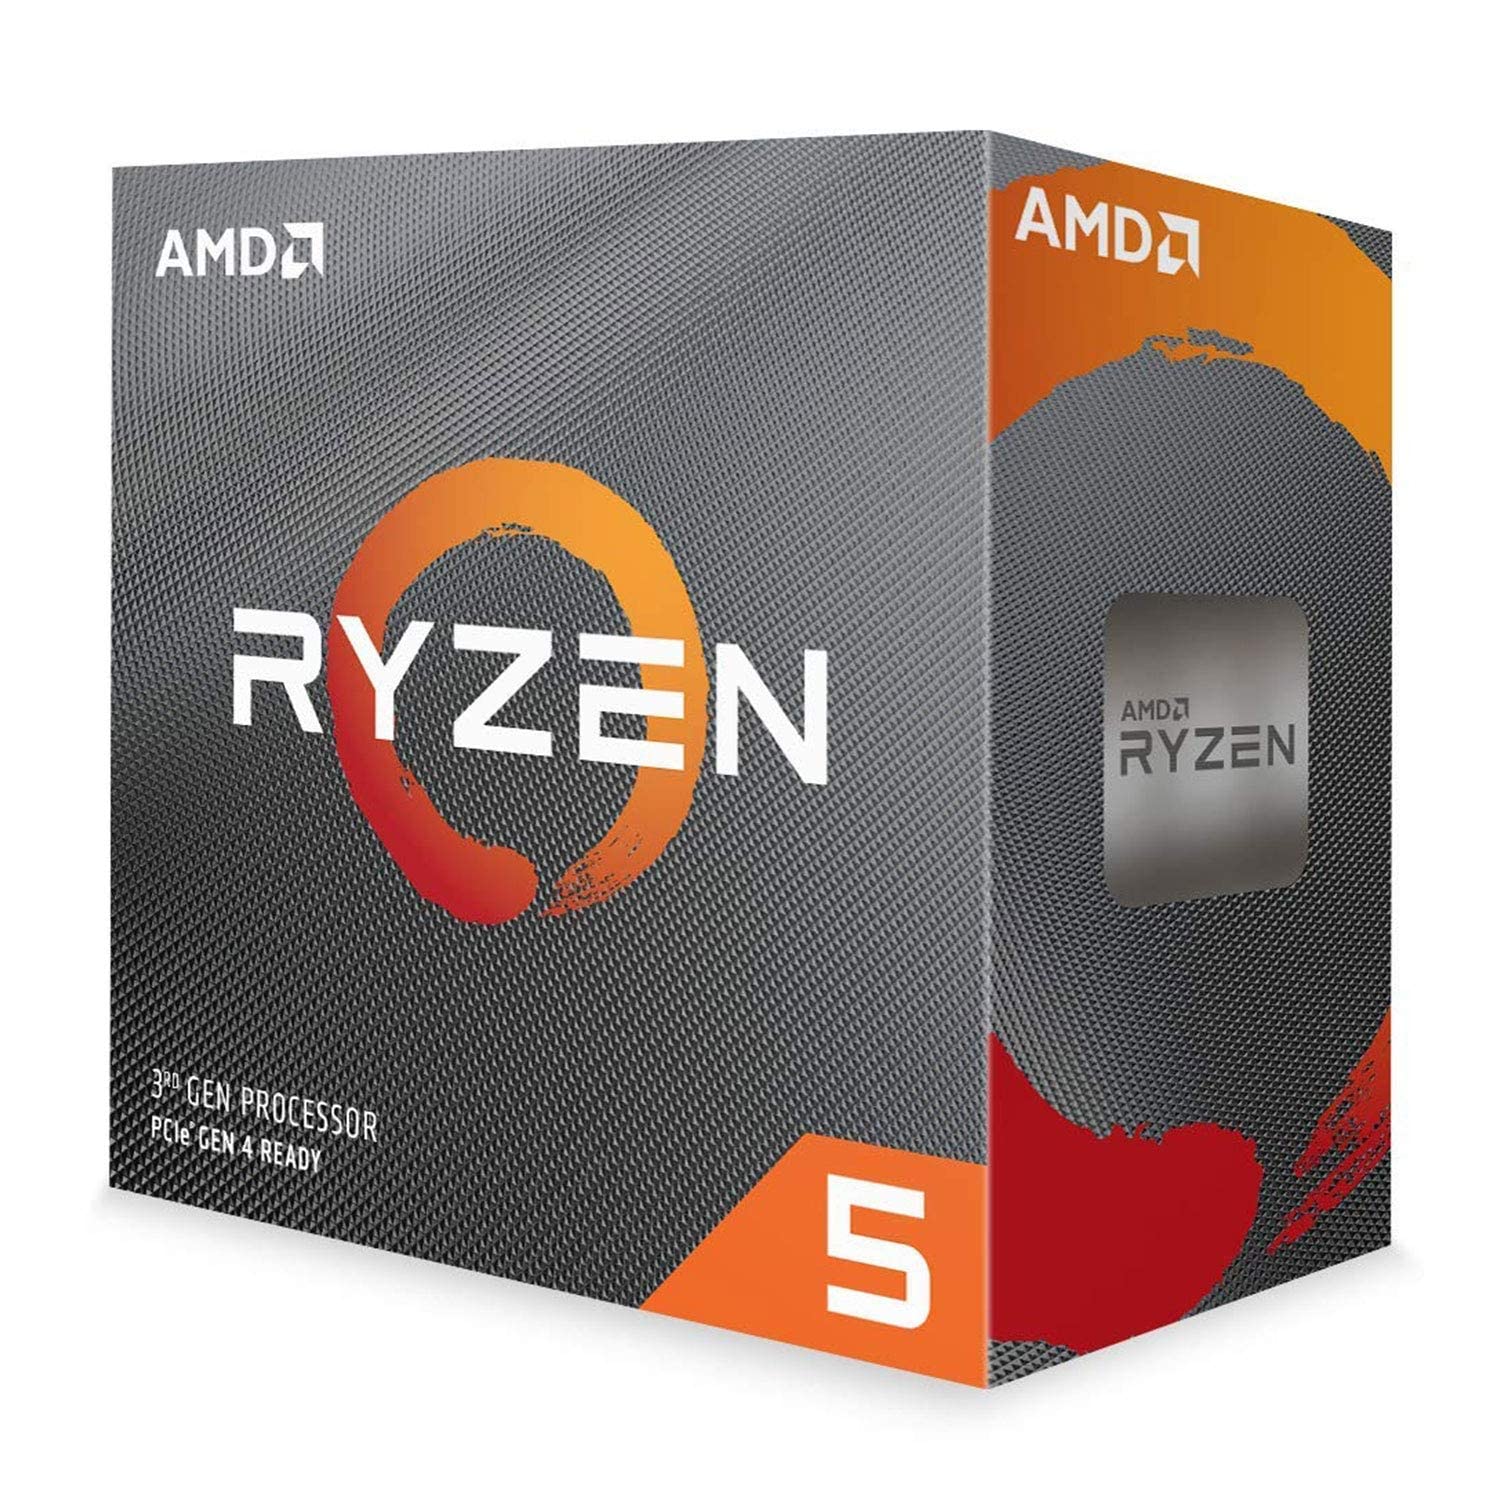 You are currently viewing Comparing AMD Ryzen 5 5500 vs 5600 Specs